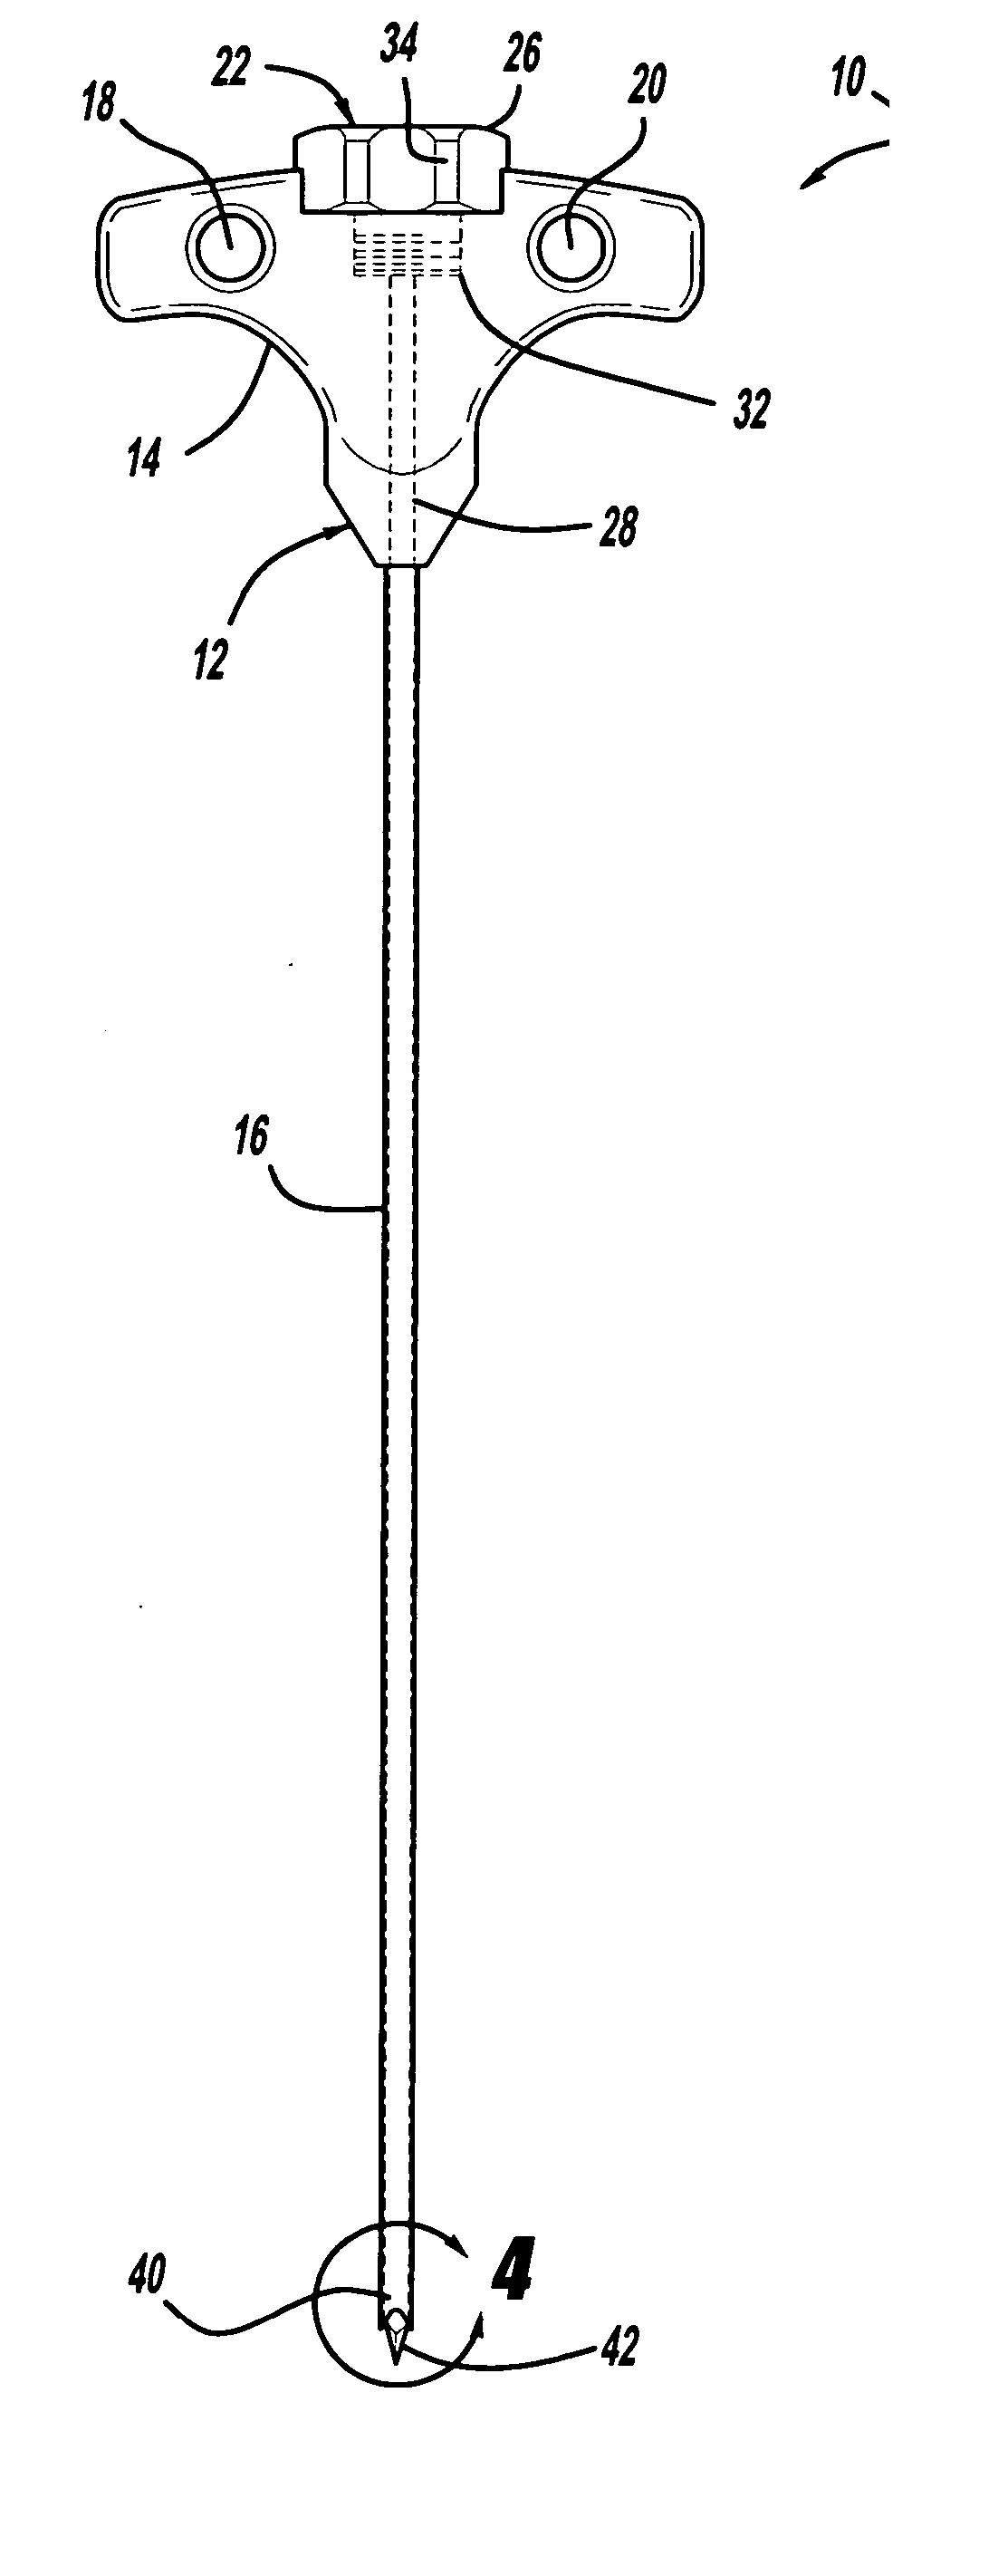 Pedicle access device